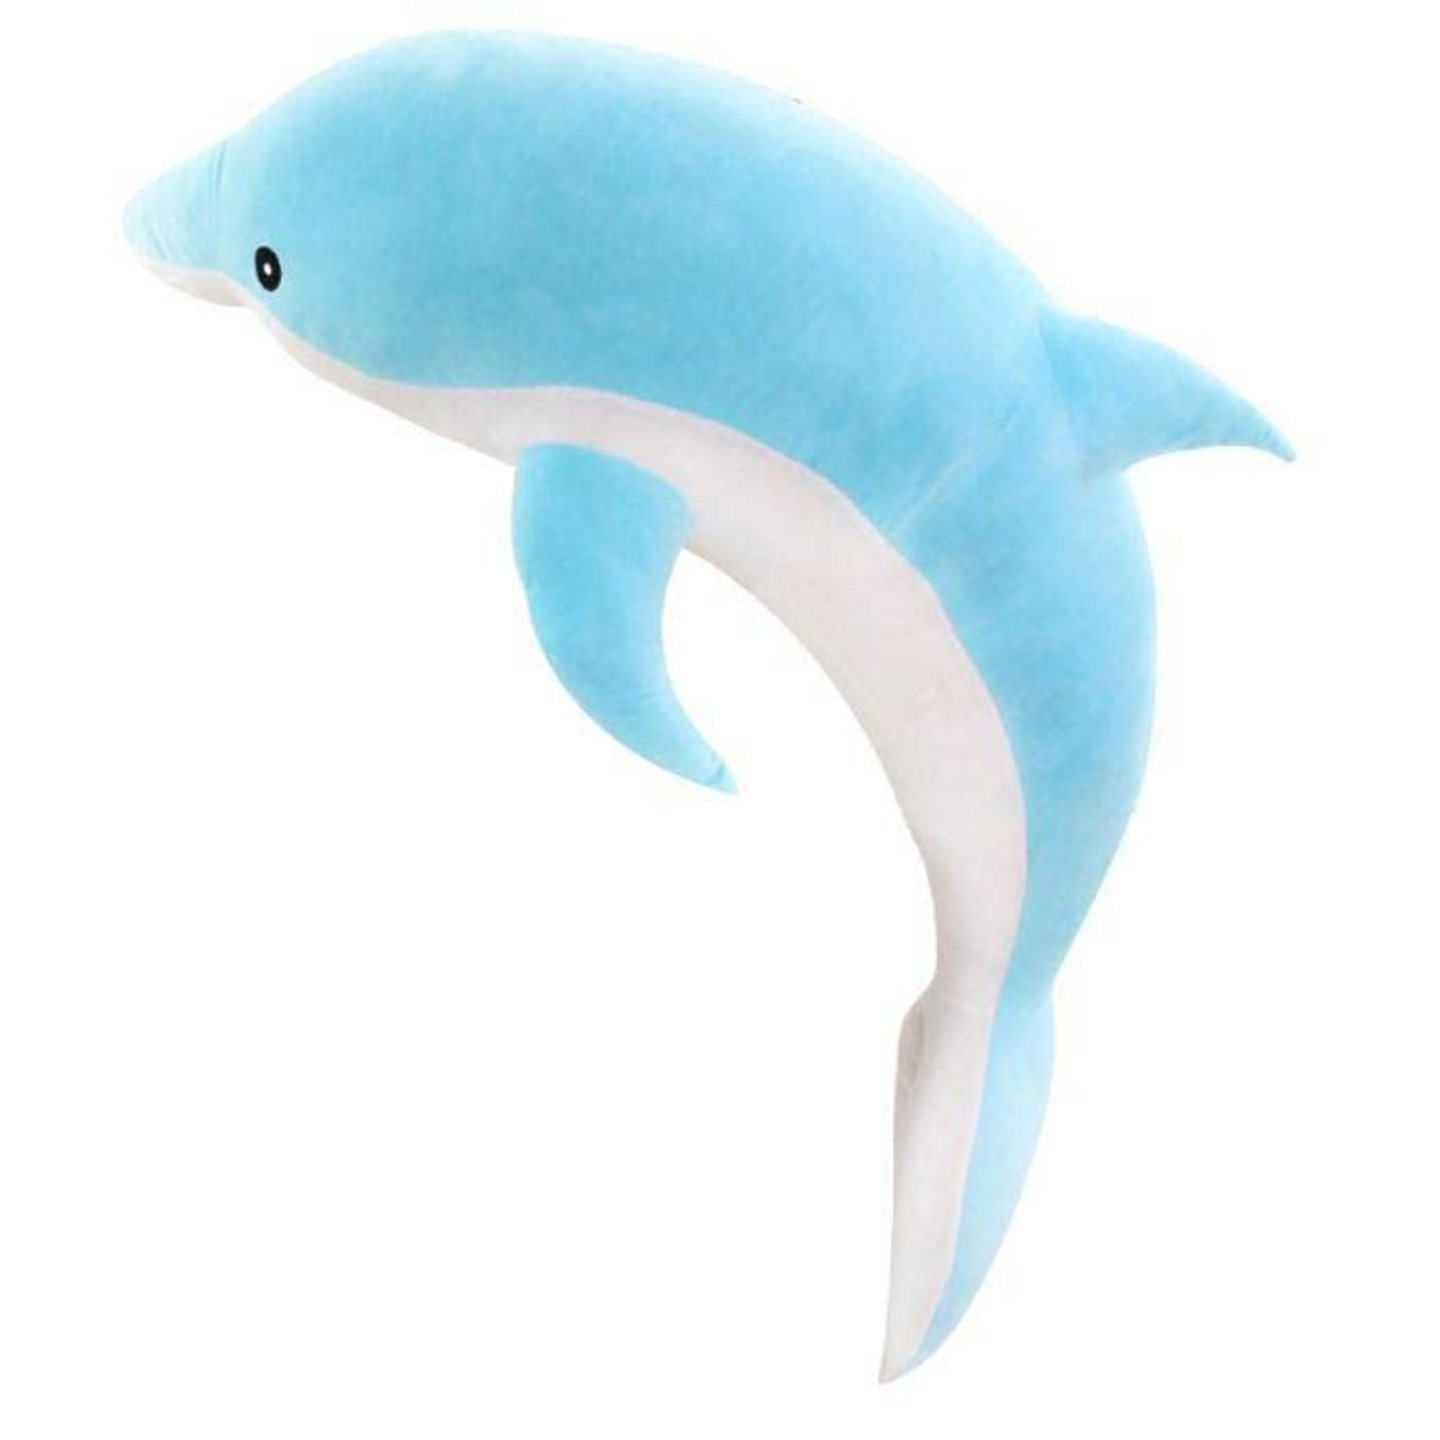 Dark Blue and White Dolphin soft toy for kids - 25 cm